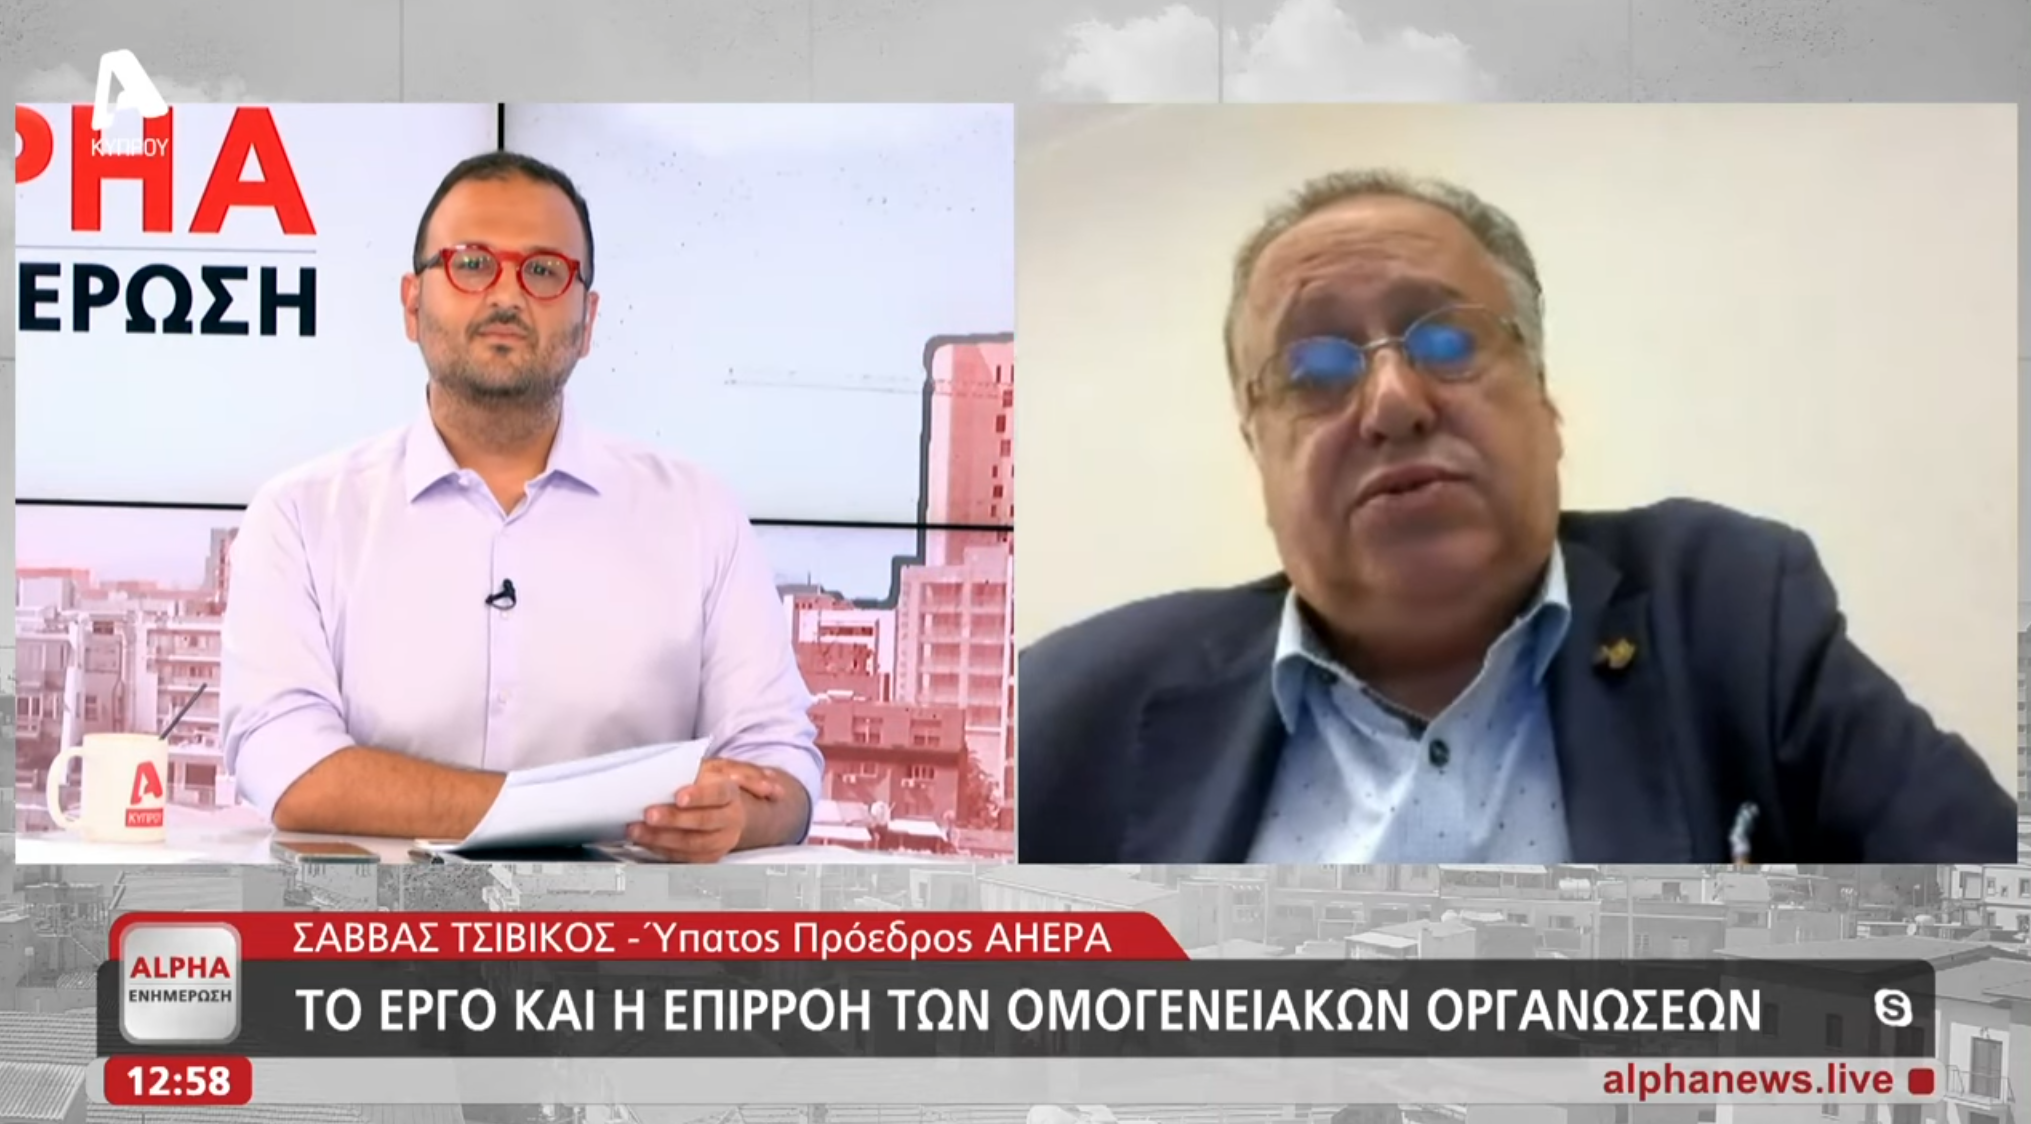 <strong>Alpha Channel Covers AHEPA’s Cyprus Convention, Interviews Tsivicos</strong>